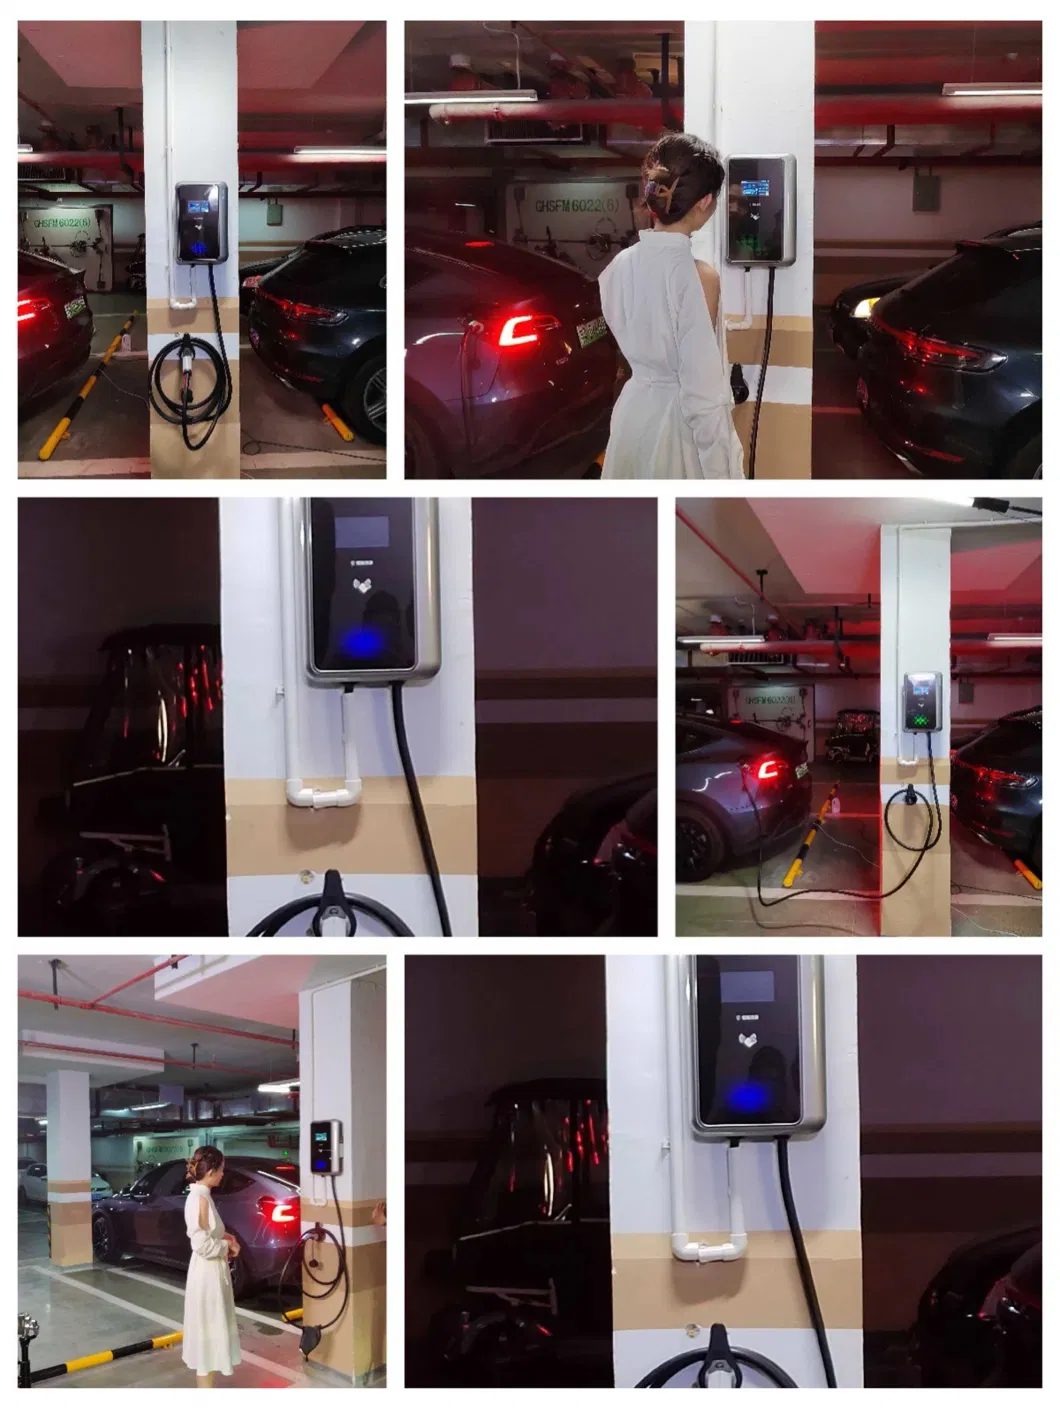 11kw Type 2 EV Charger Factory Electric Vehicle Charger Wallbox Car Battery Charger